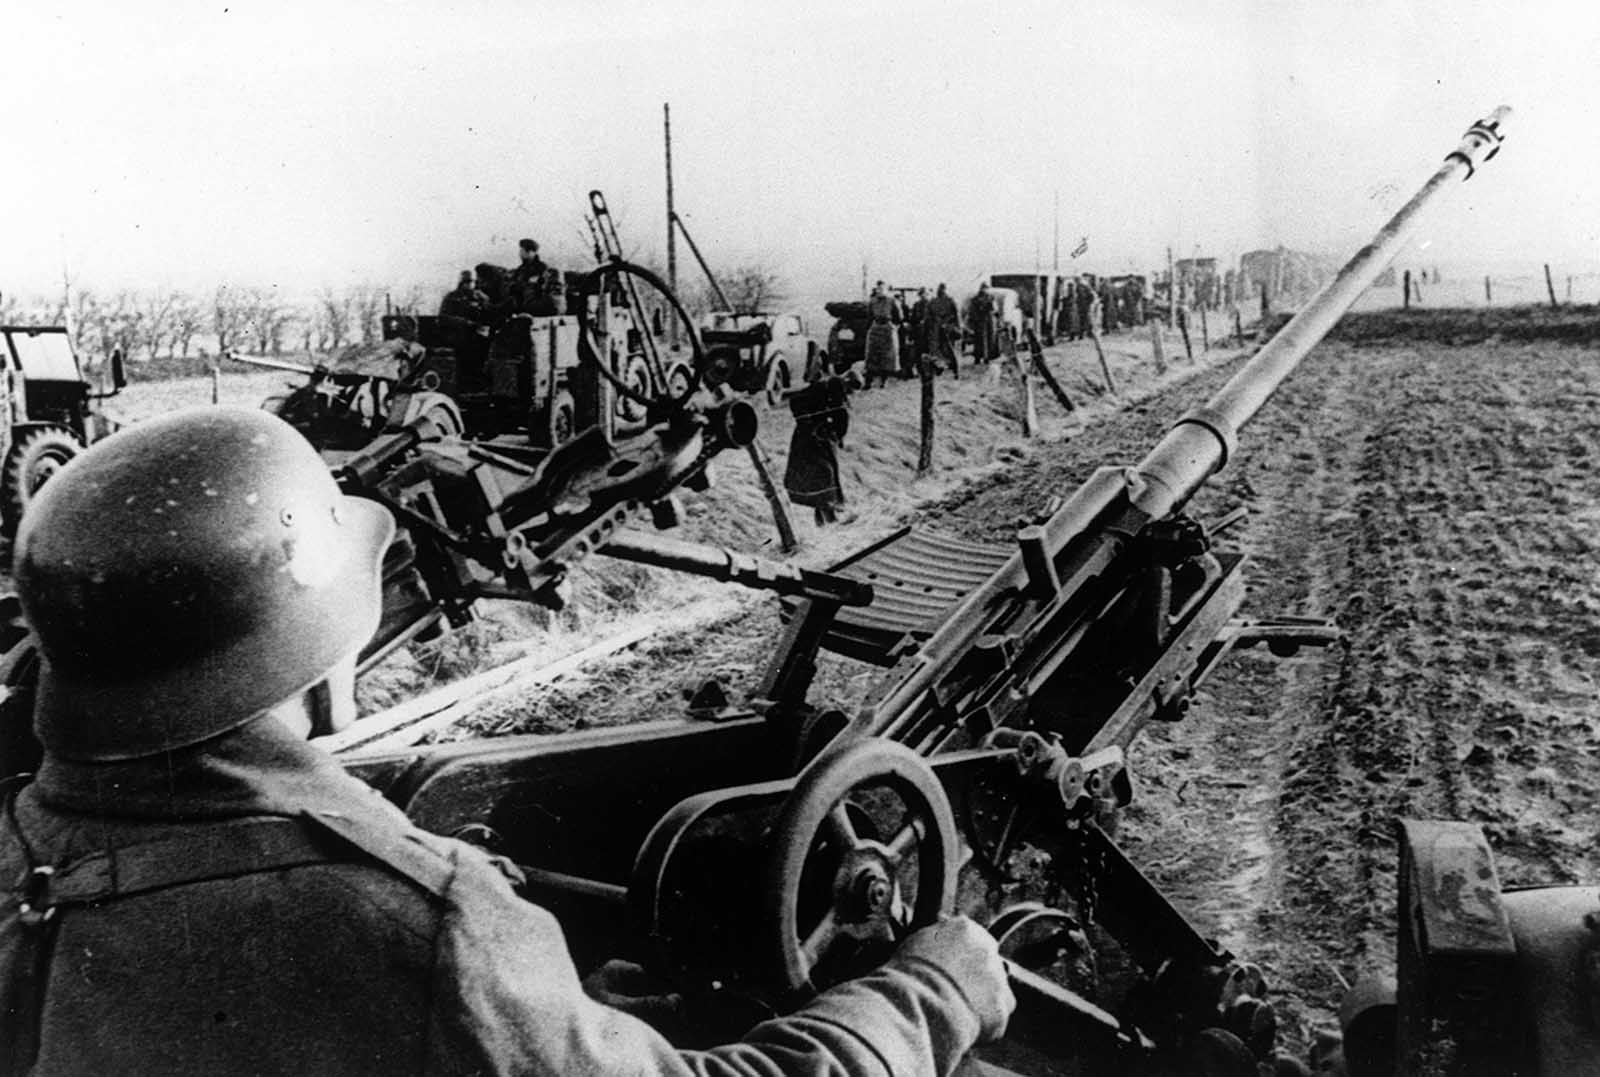 A German soldier operates his antiaircraft gun at an unknown location, in support of the German troops as they march into Danish territory, on April 9, 1940.